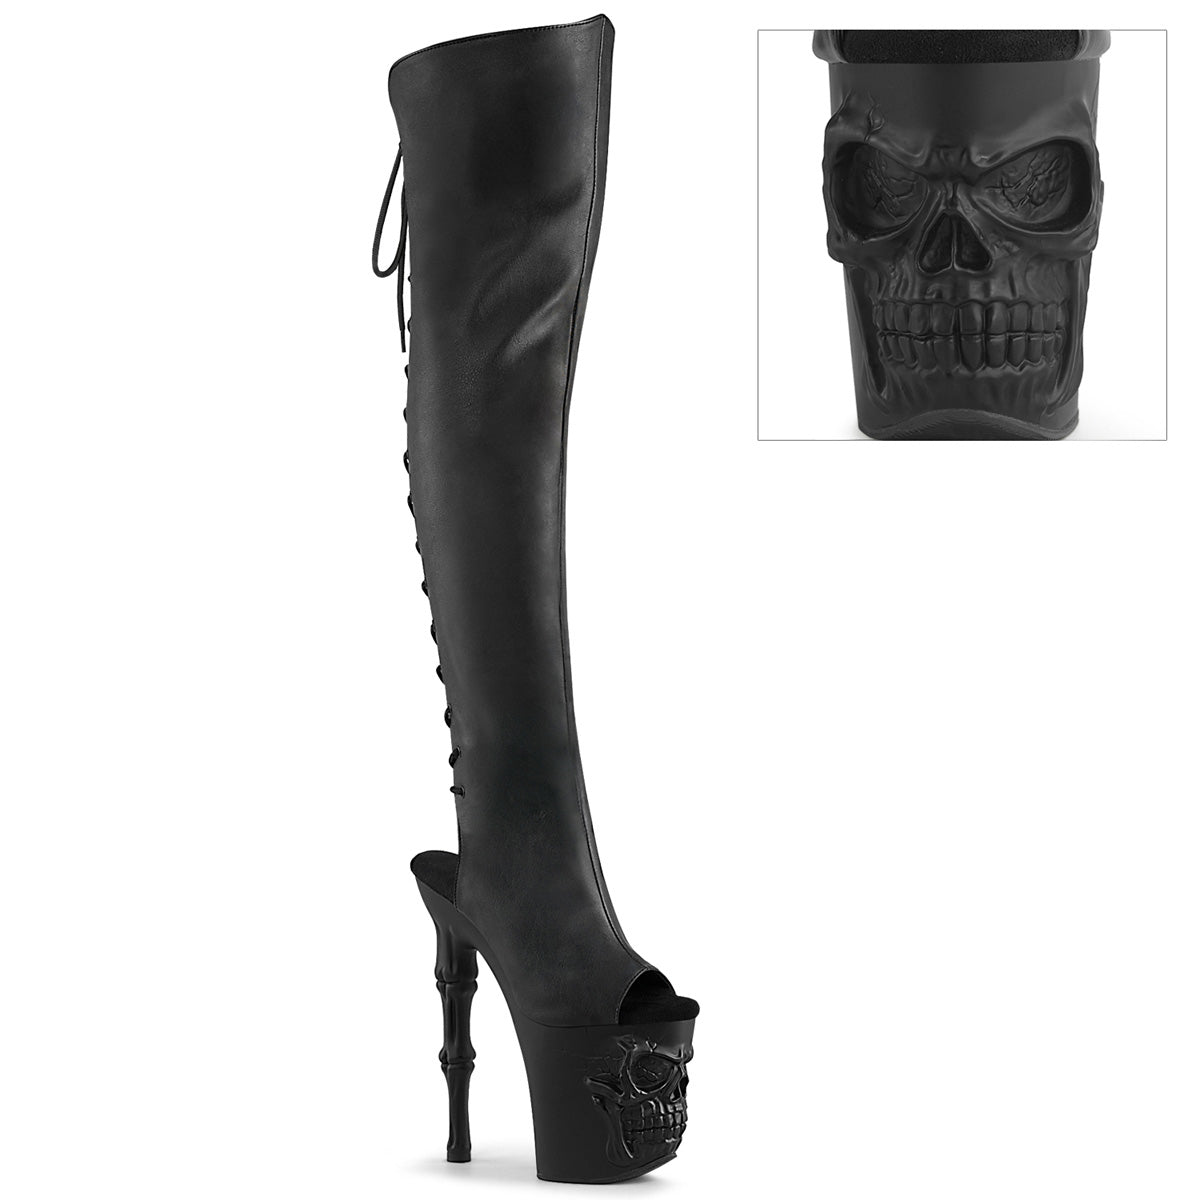 RAPTURE-3019 Skull Over-the-Knee Boot  Multi view 1